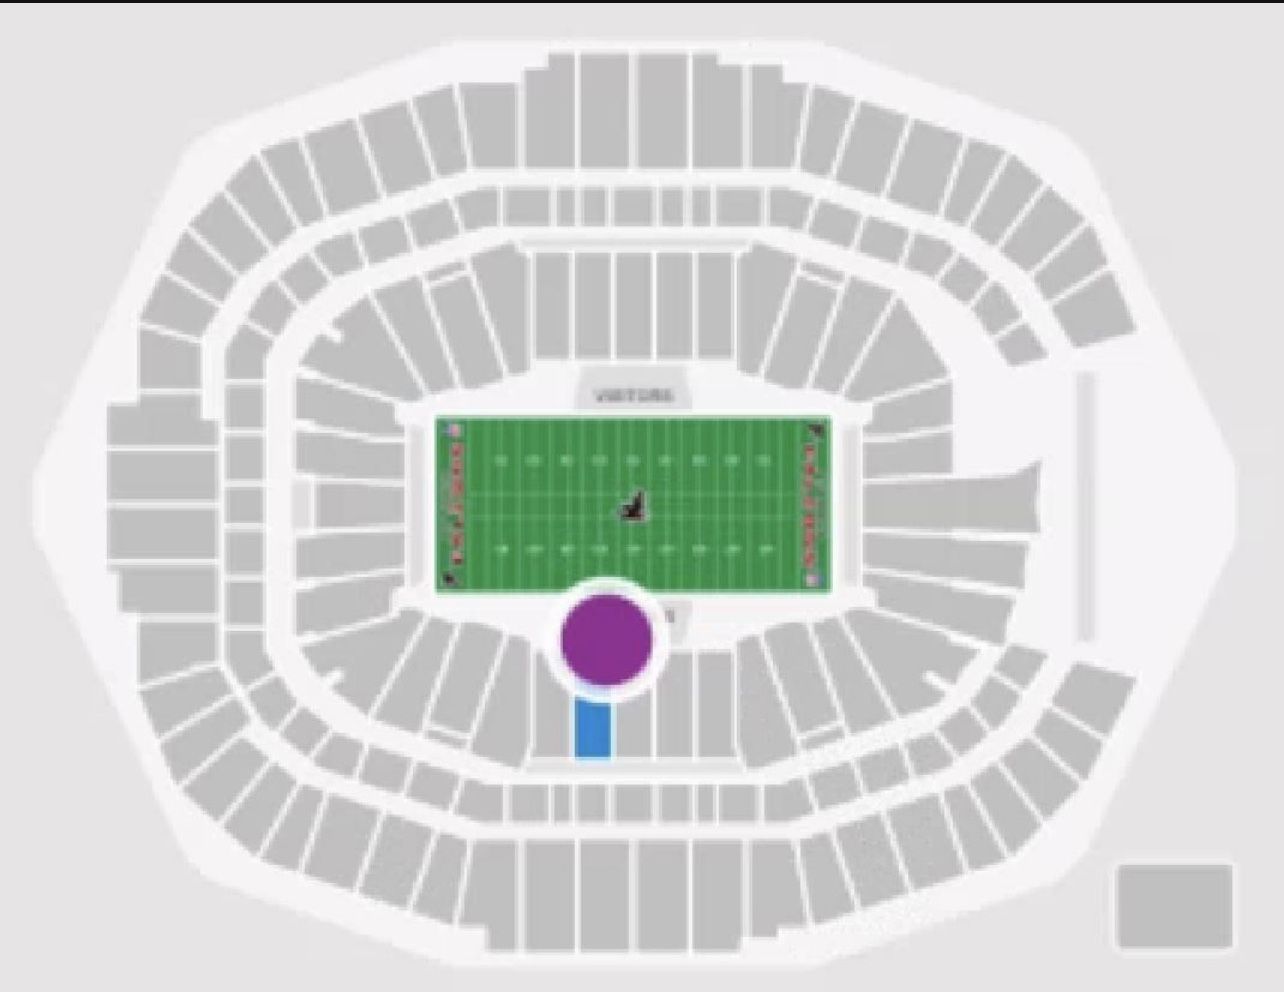 4 Falcon Side Club Seats Vs Chicago Looking To Trade To Visitor Side